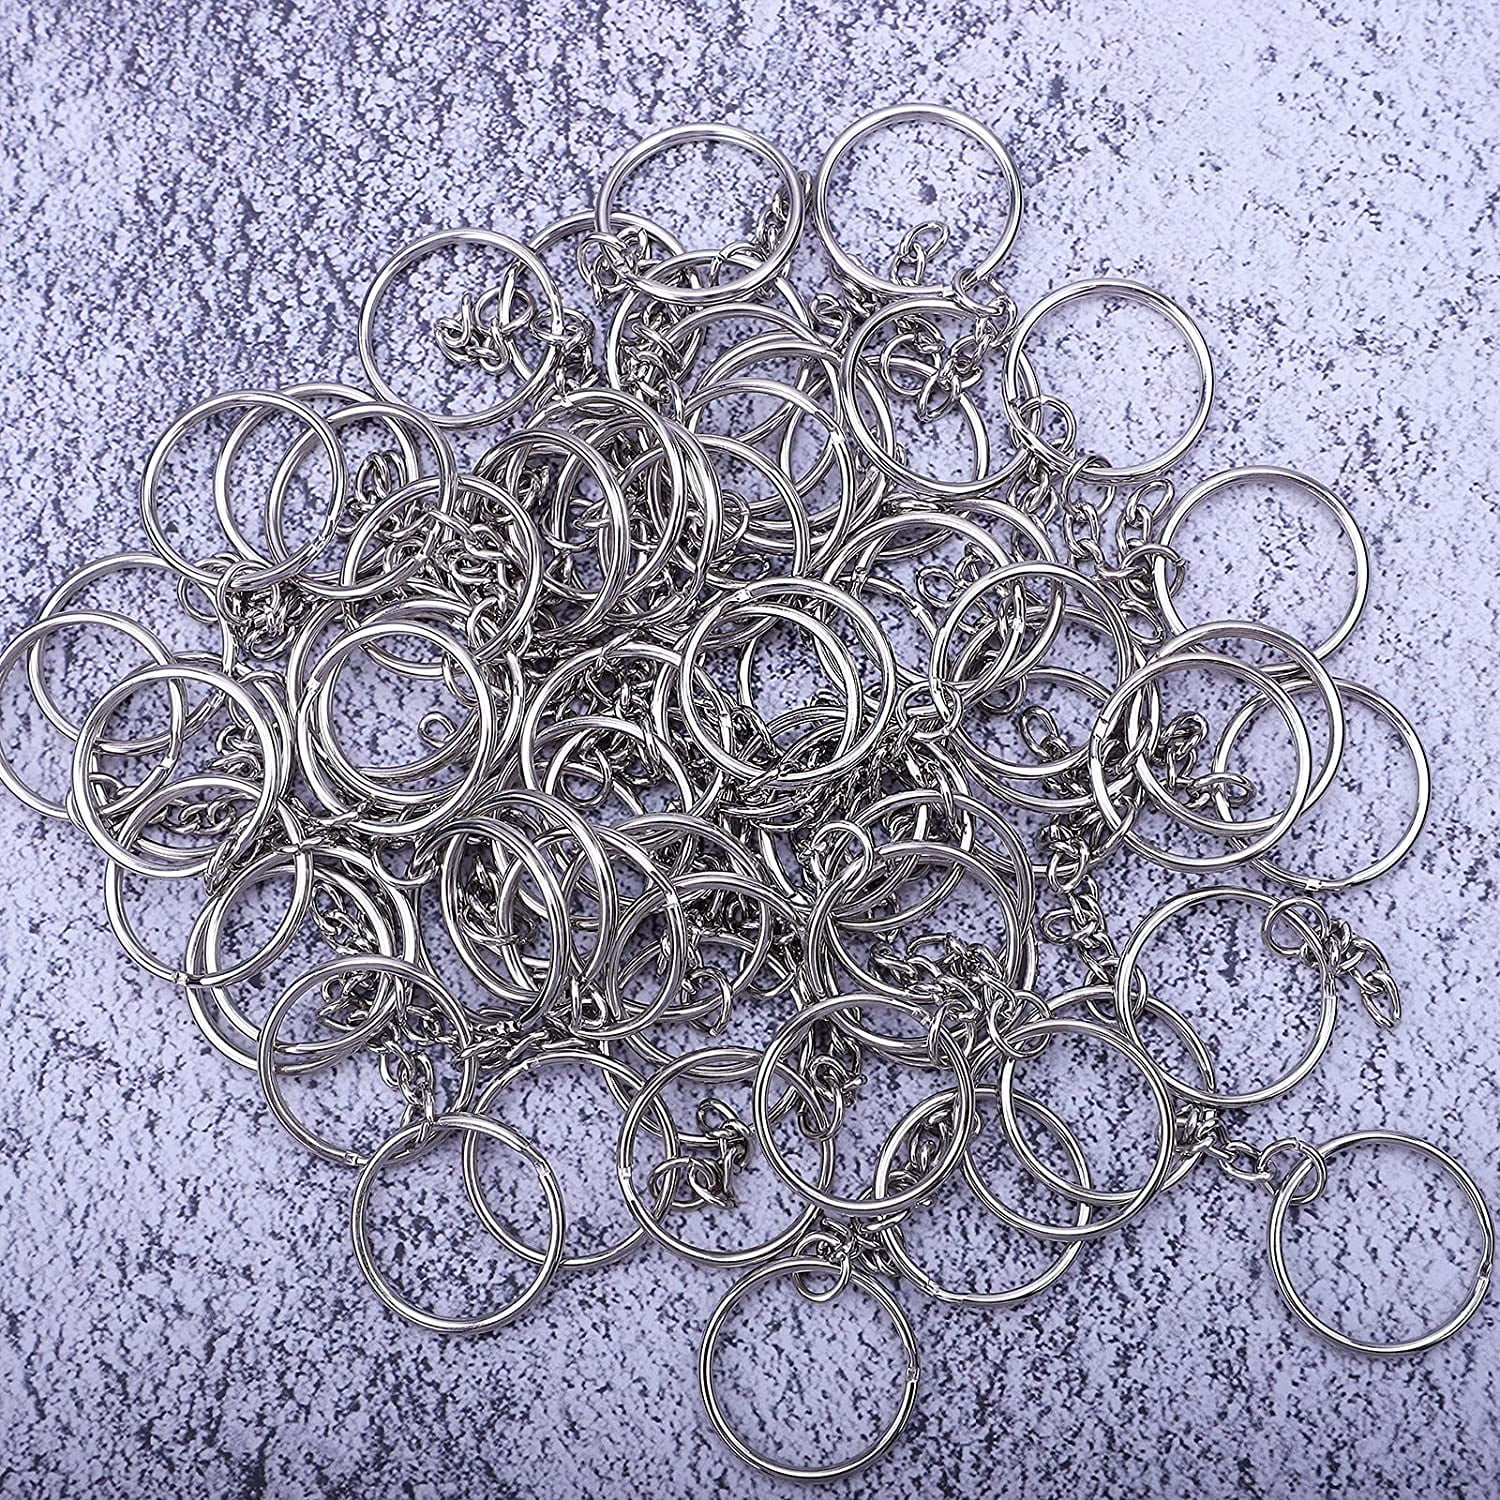 100pcs Keychain Rings with Chain and Jump Rings, 1 inch Split Key Ring with  Chain Heavy-Duty Keychain Rings Bulk for Craft Making Jewelry Making  Keyrings Kit 